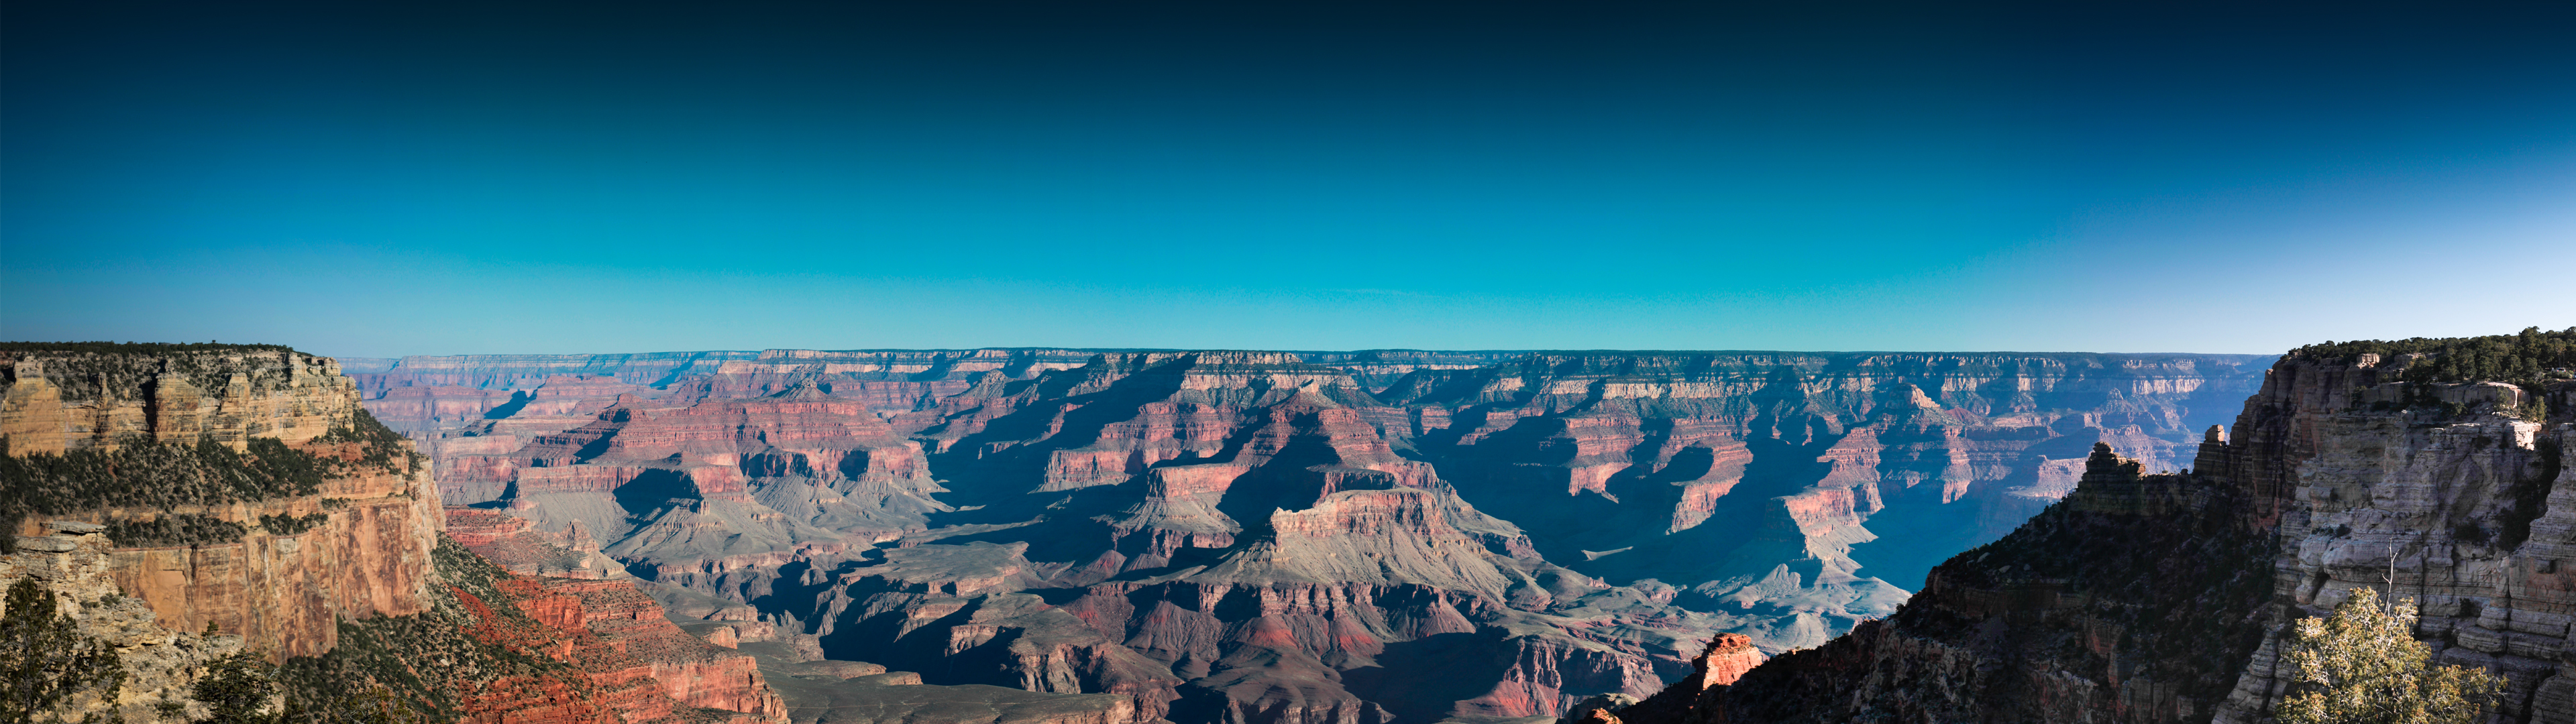 grandcanyon_3840x1080_by_hours92 d75isgy